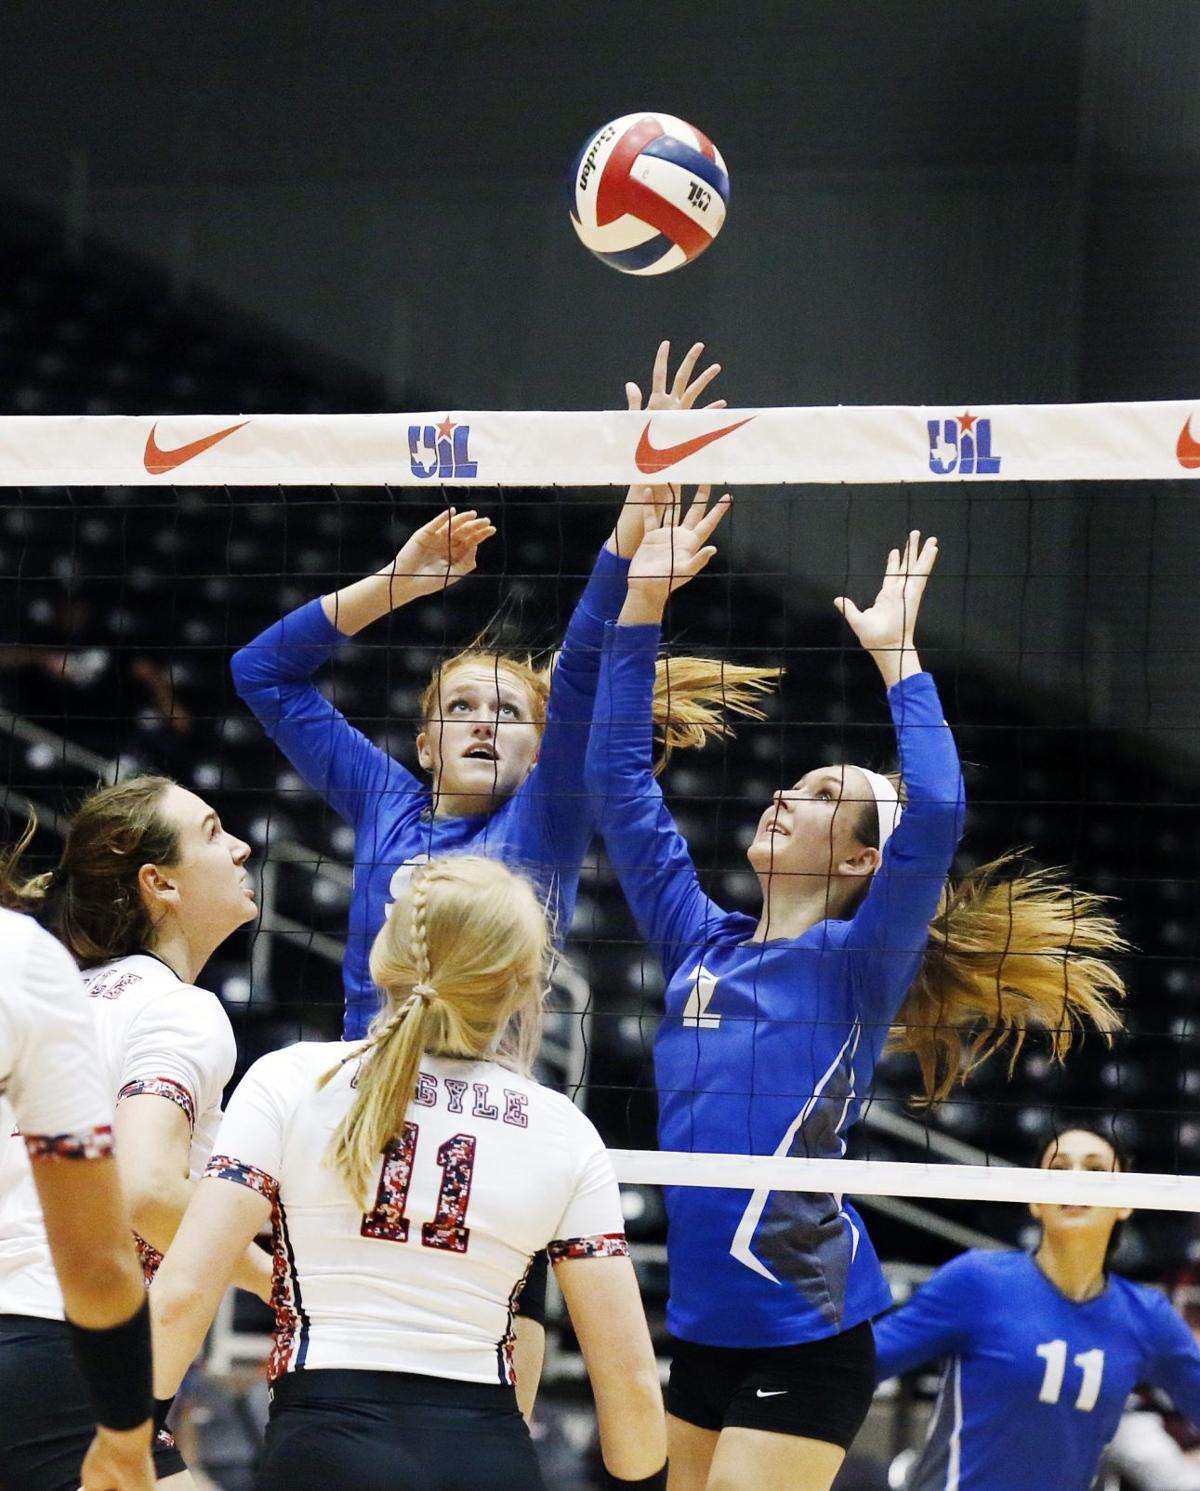 Centex volleyball preview: Teams ready to build on 2015 success with ...